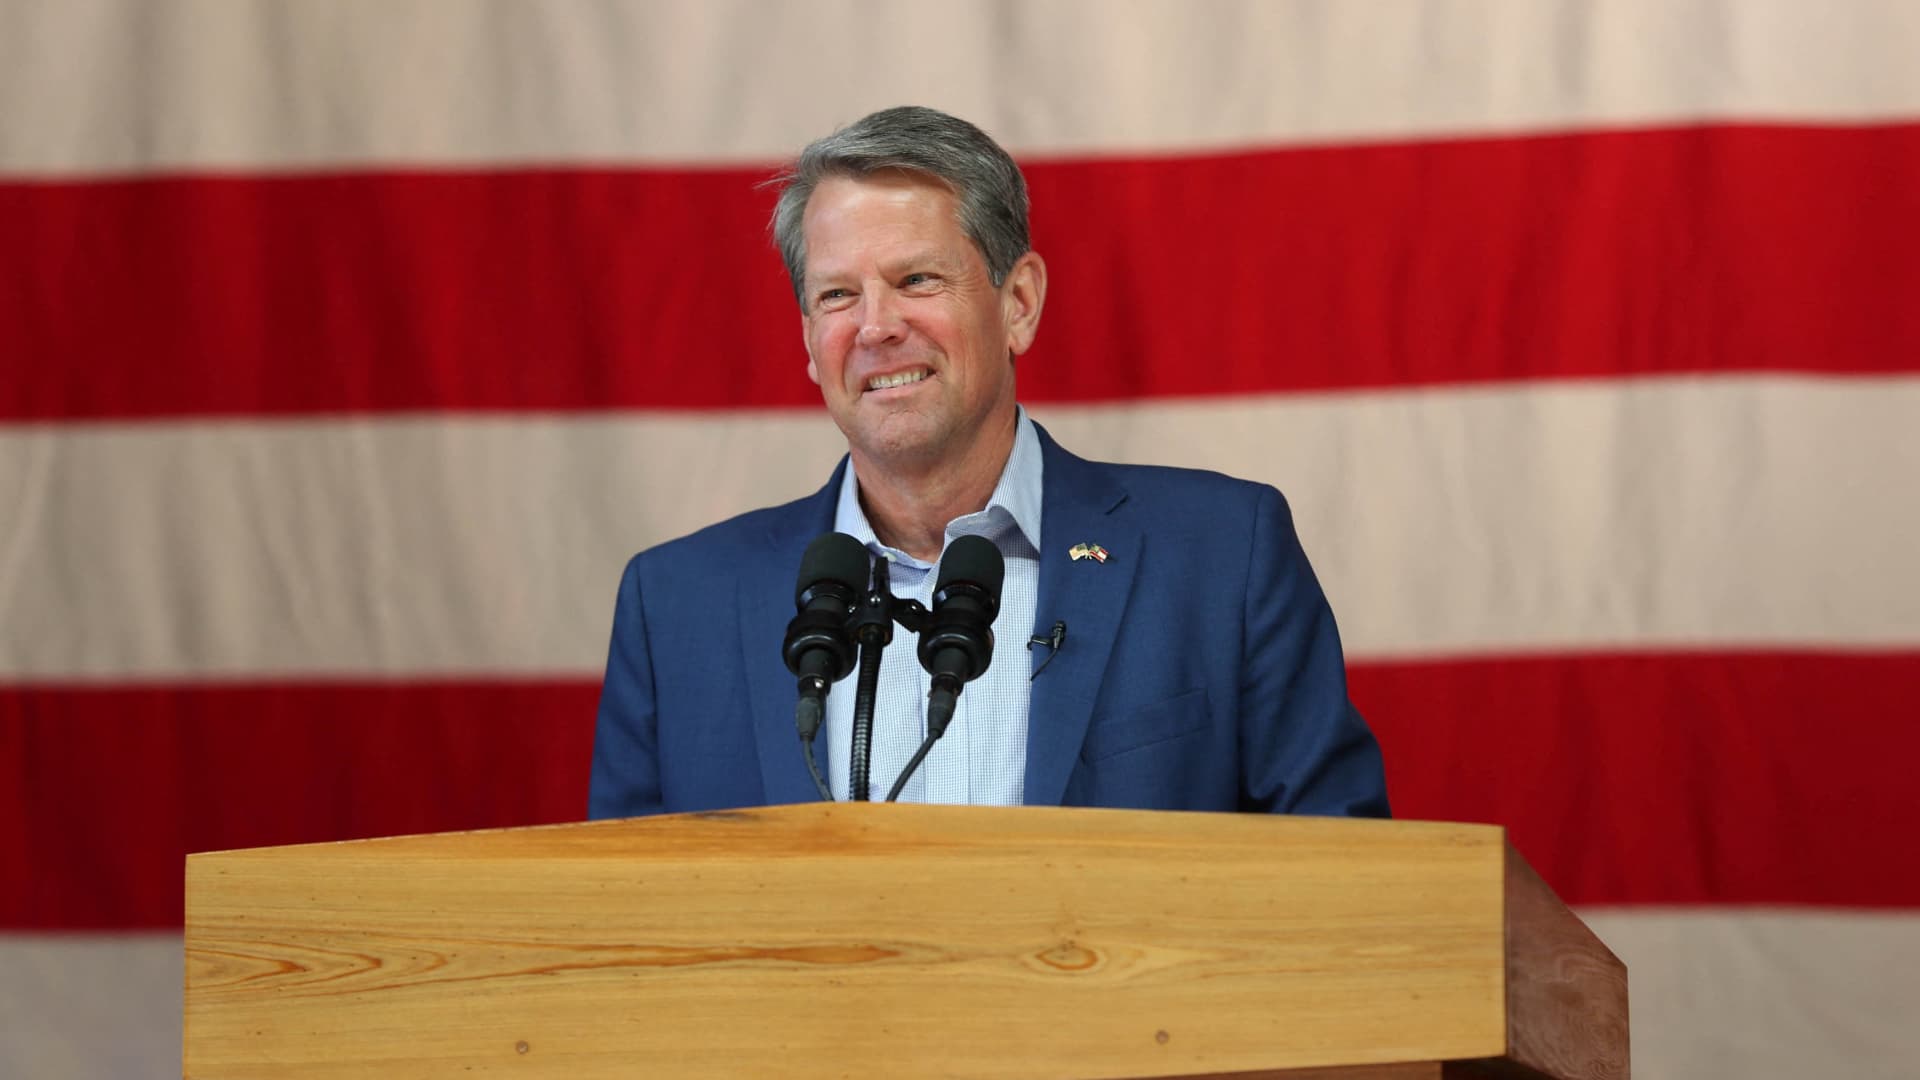 Georgia Governor Brian Kemp speaks during a rally ahead of the state's Republican primary, in Kennesaw, Georgia, U.S. May 23, 2022. 